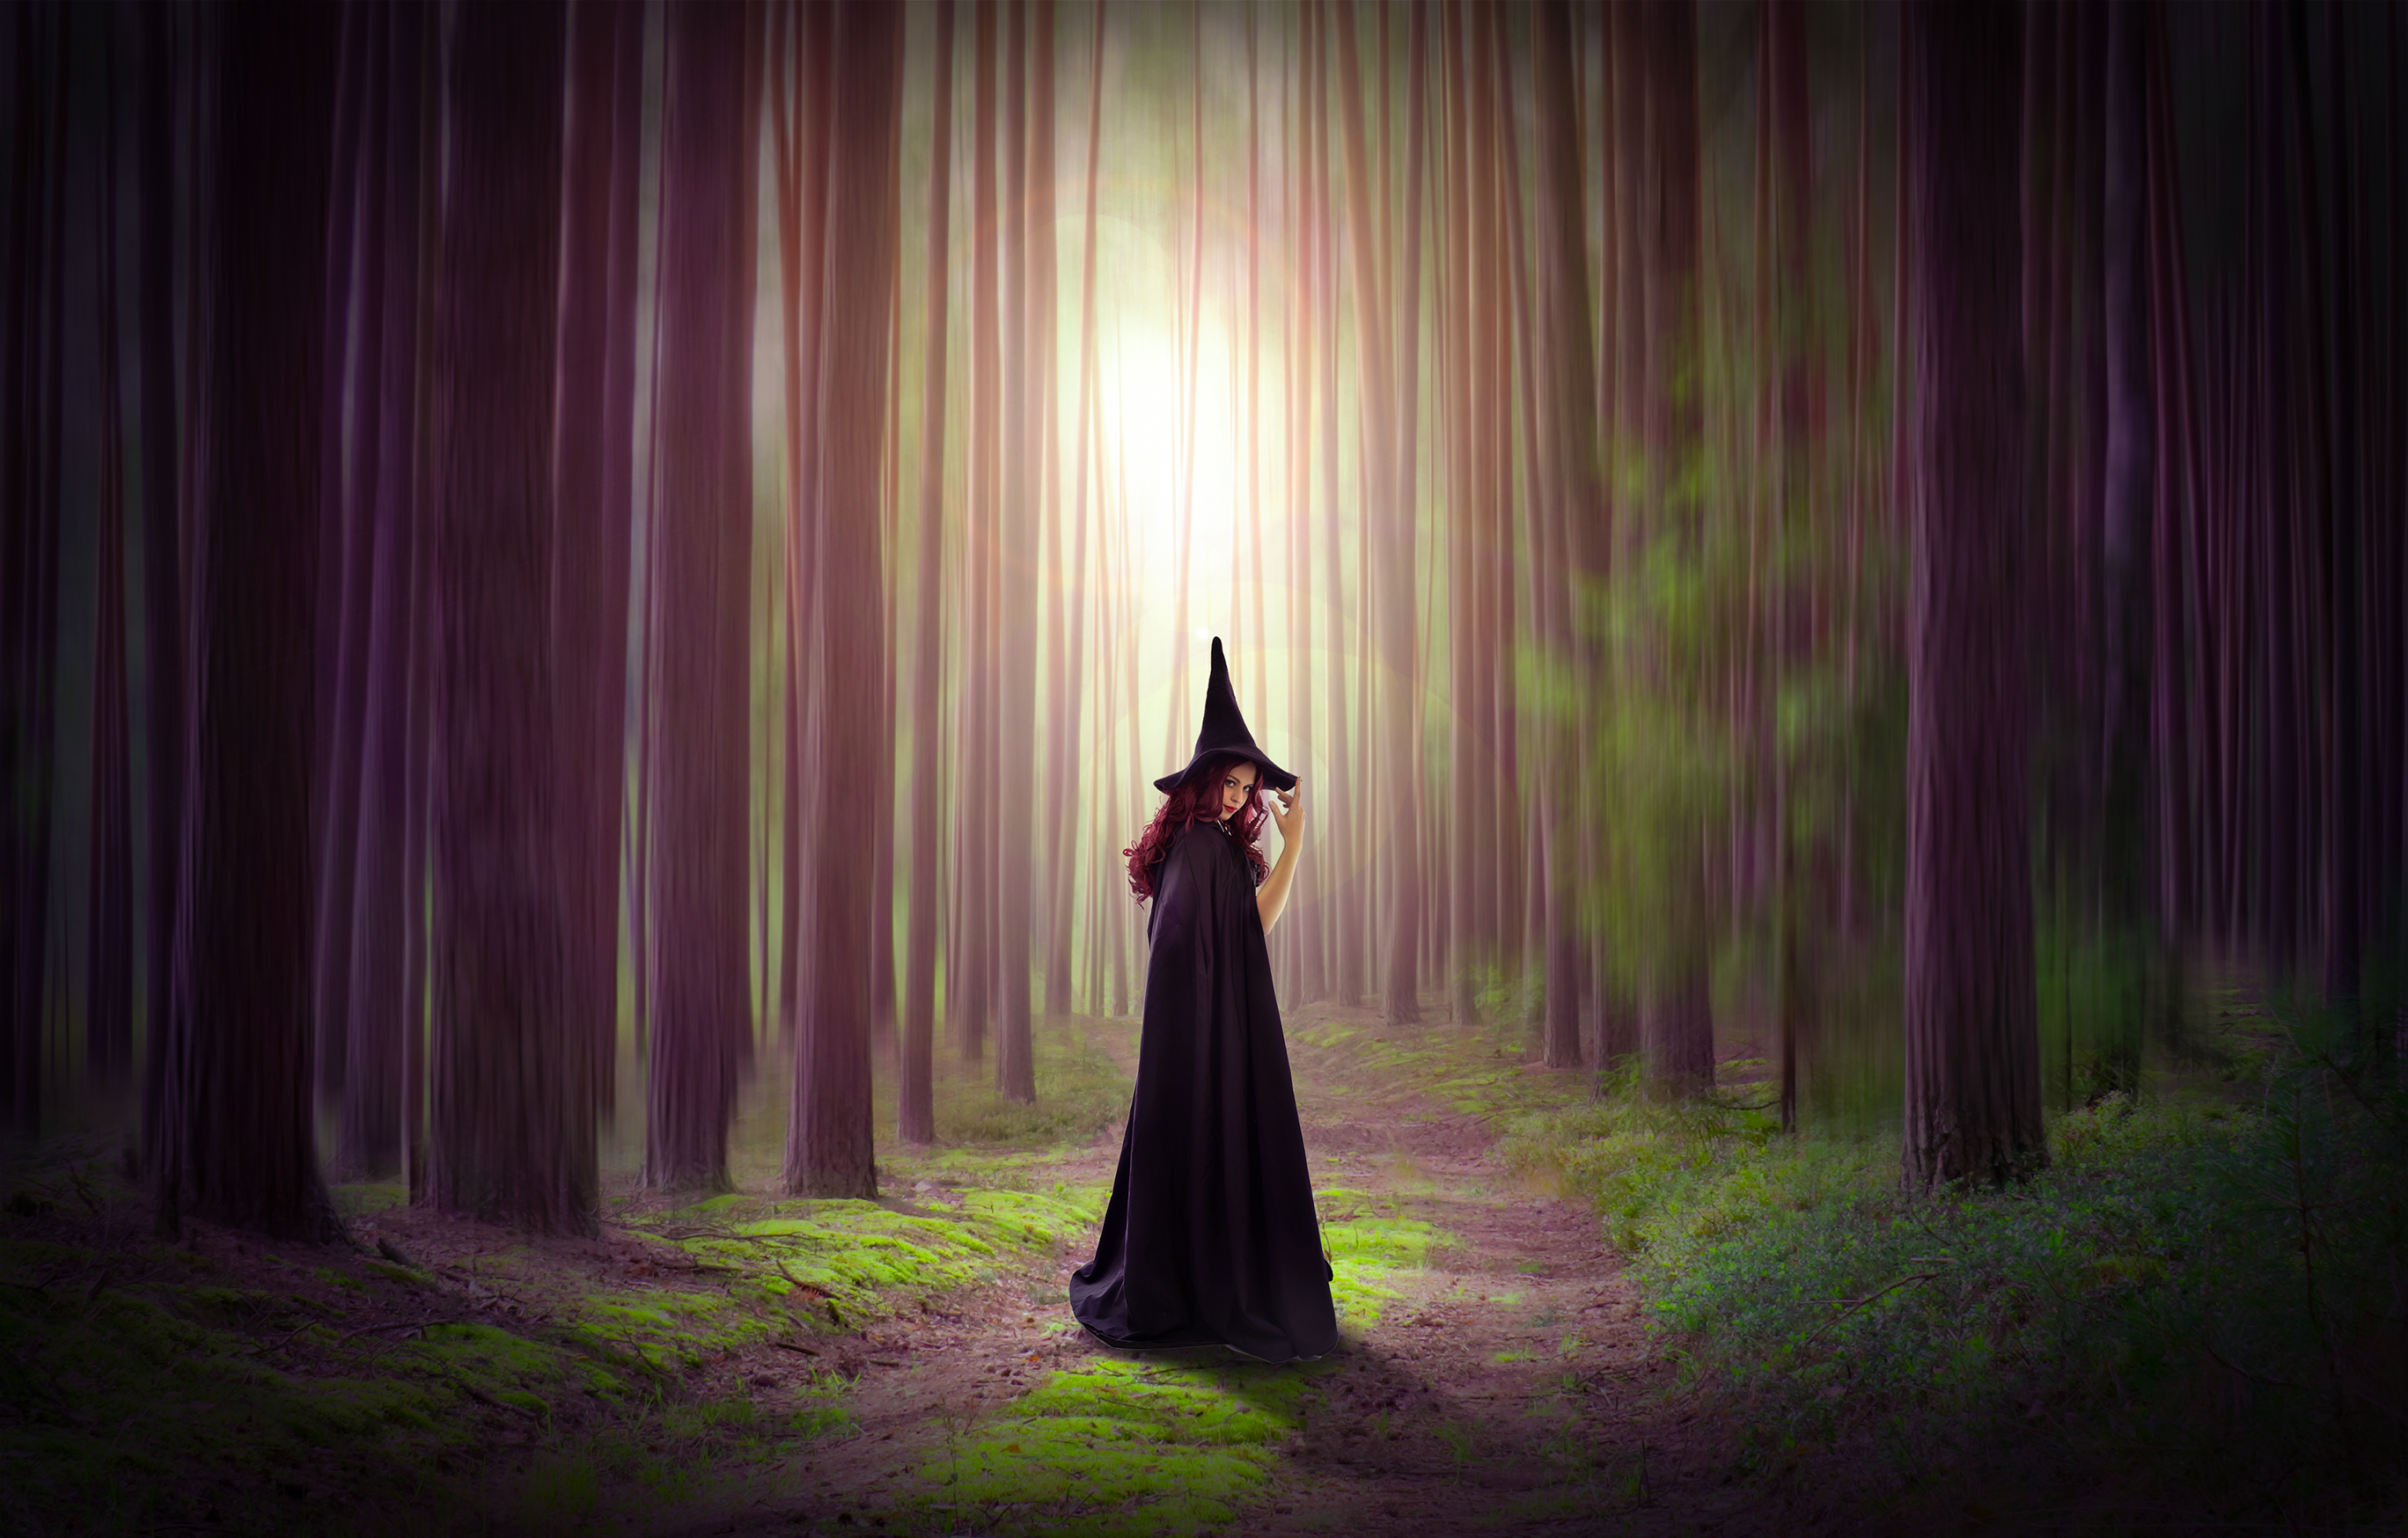 Photoshop Photo Manipulation Forest Trees Green Magenta Witch Witch Hat Dirt Road 2736x1748